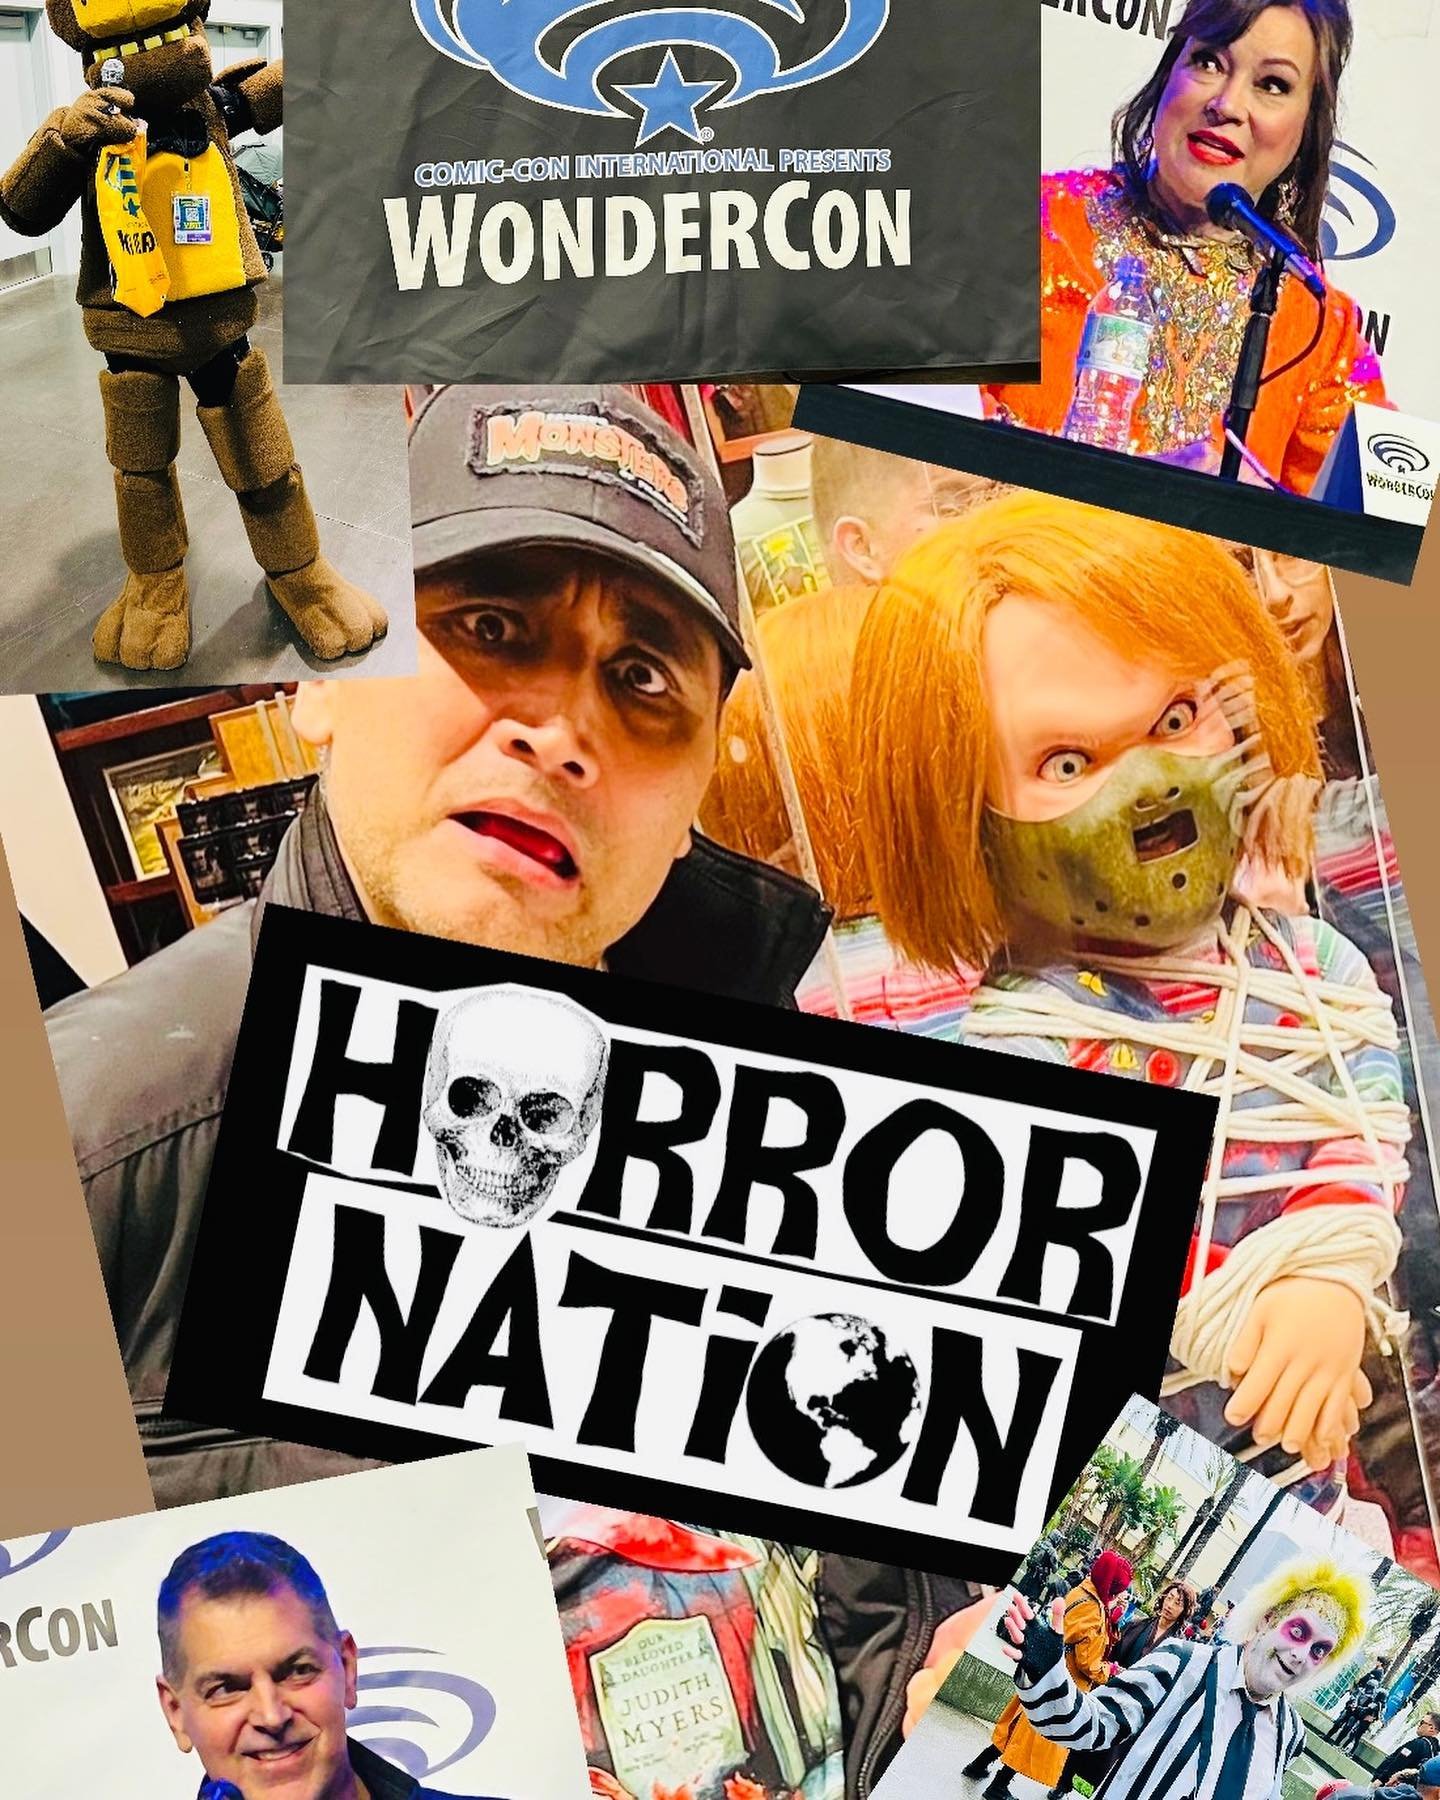 Hey everyone! Check out my new article on the &ldquo;CHUCKY&rdquo; series w/ JENNIFER &ldquo;TIFFANY&rdquo; TILLY and Child&rsquo;s Play franchise creator &ldquo;DON MANCINI&rdquo; + entire cast of show, published in HORROR NATION. Photos/Videos by M